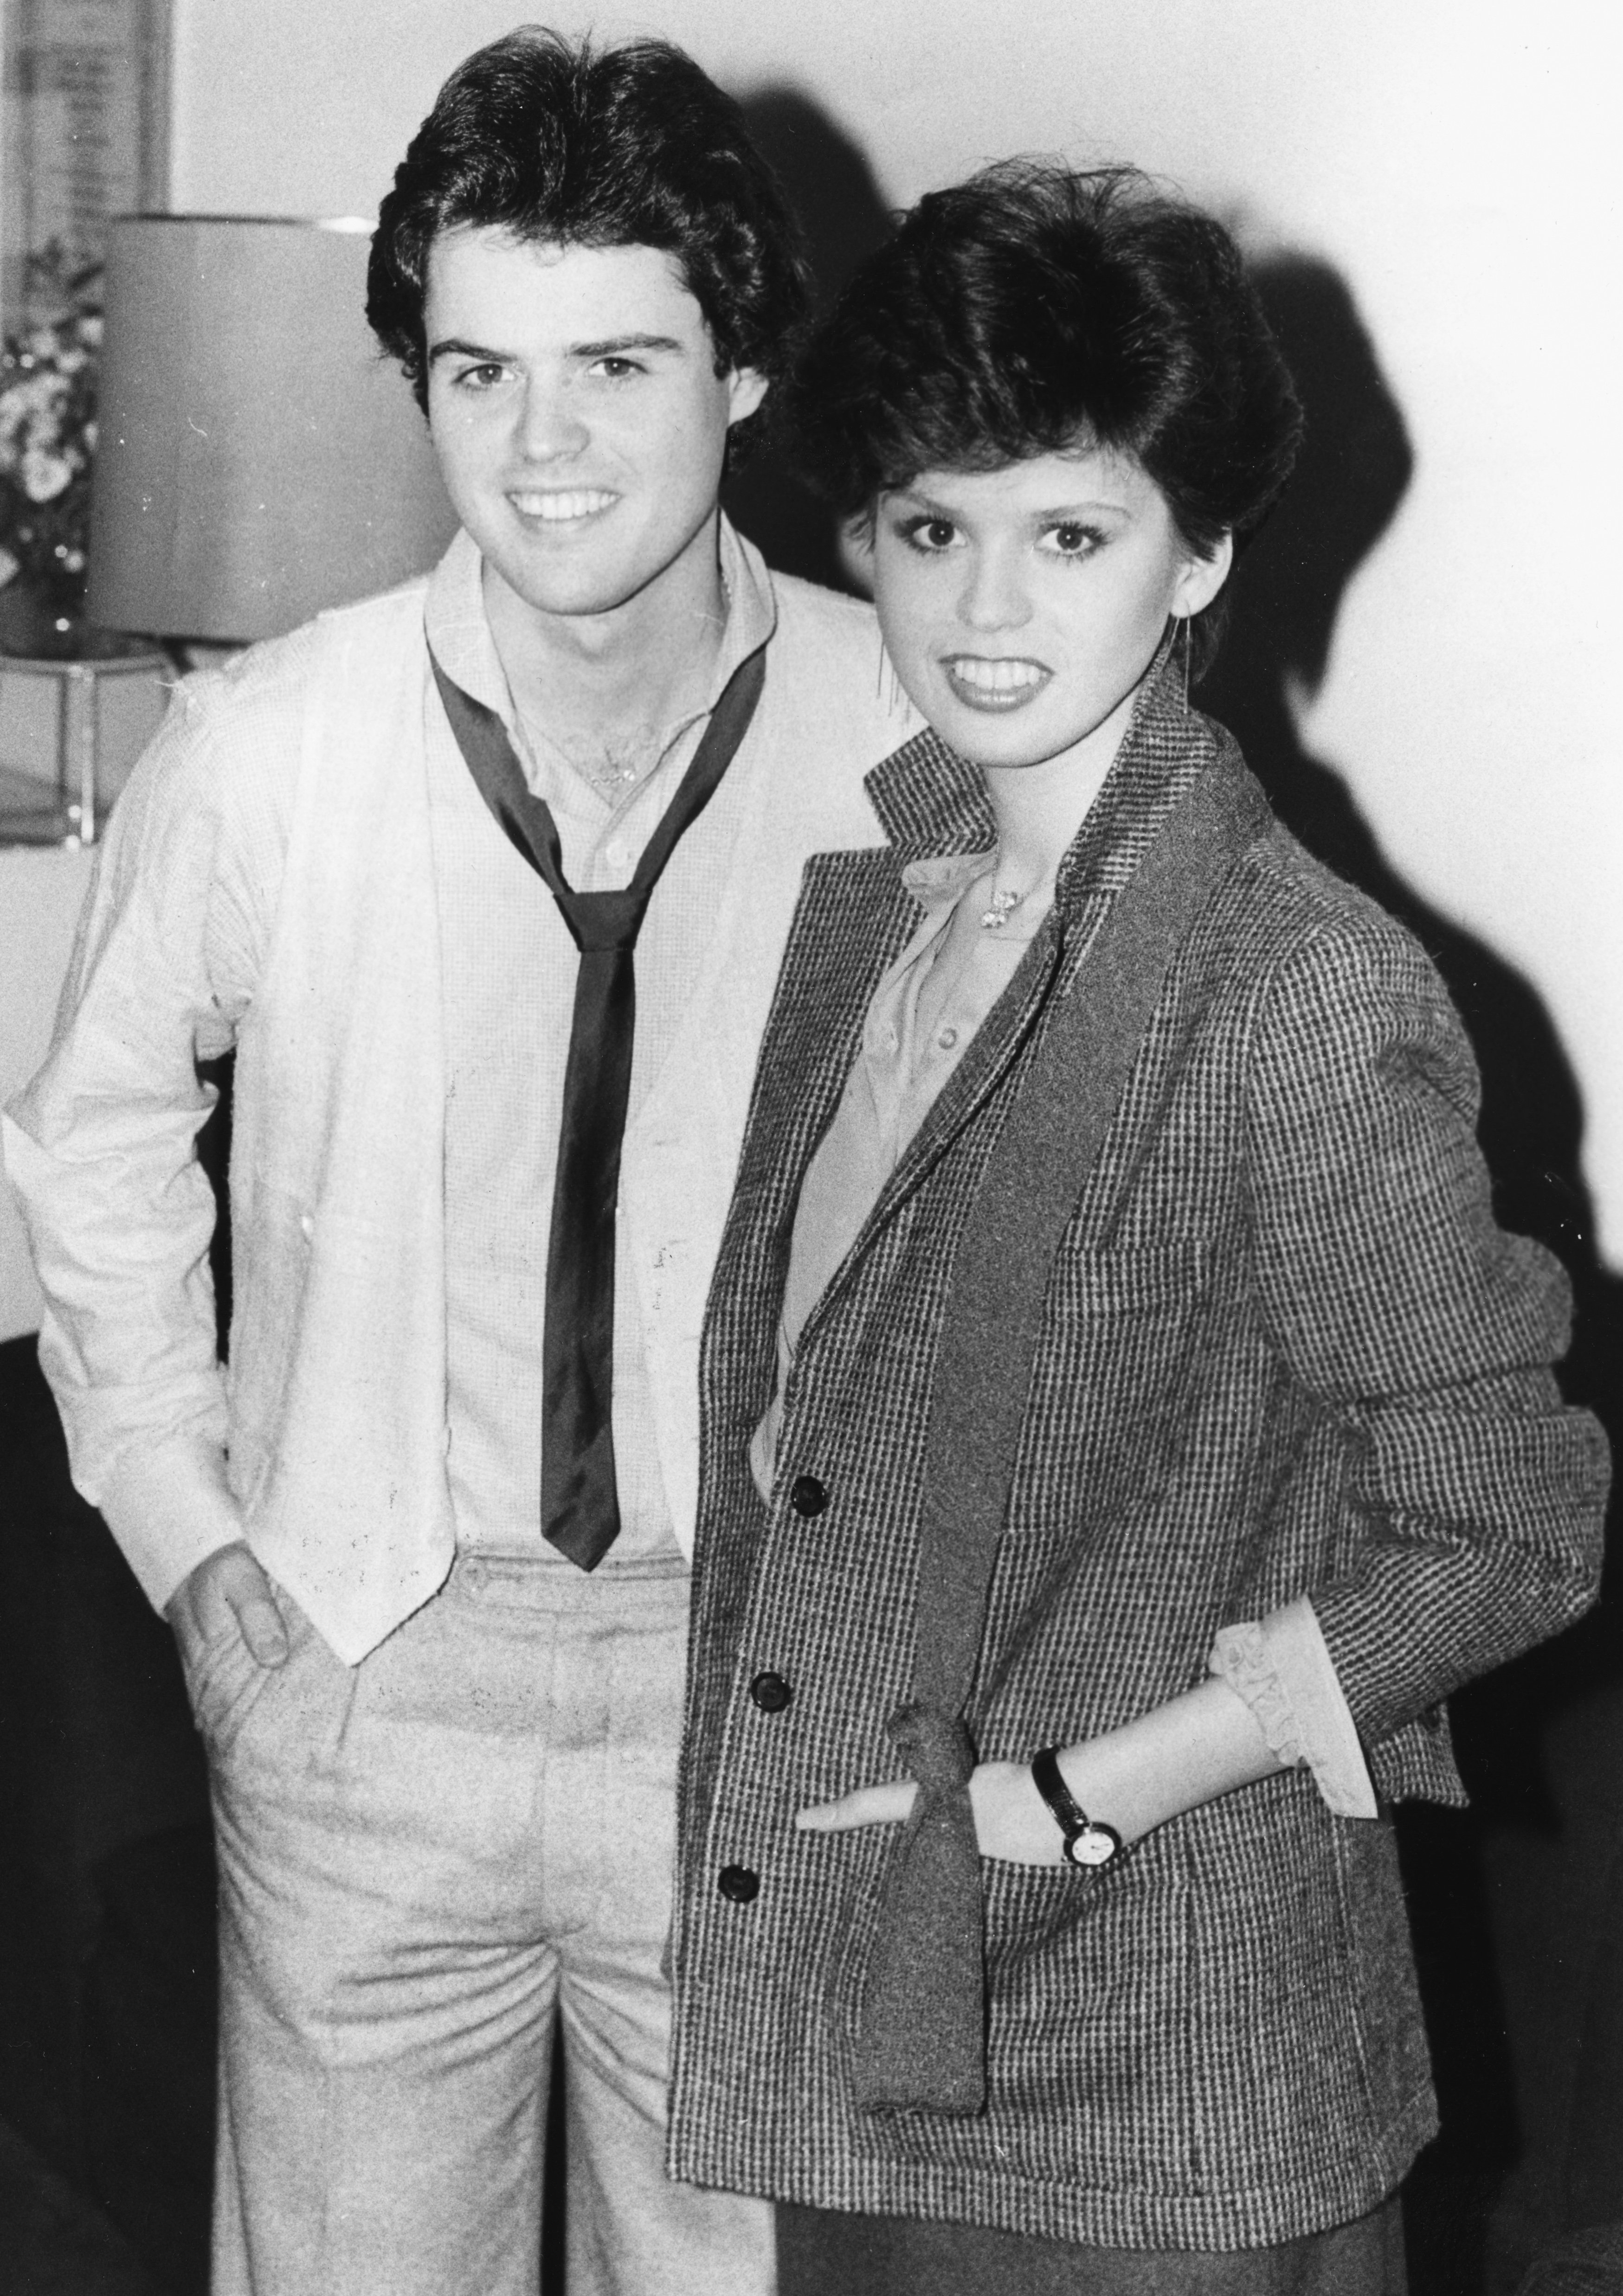 Donny and Marie Osmond smile for cameras at a London press conference on January 22, 1979 | Photo: Getty Images